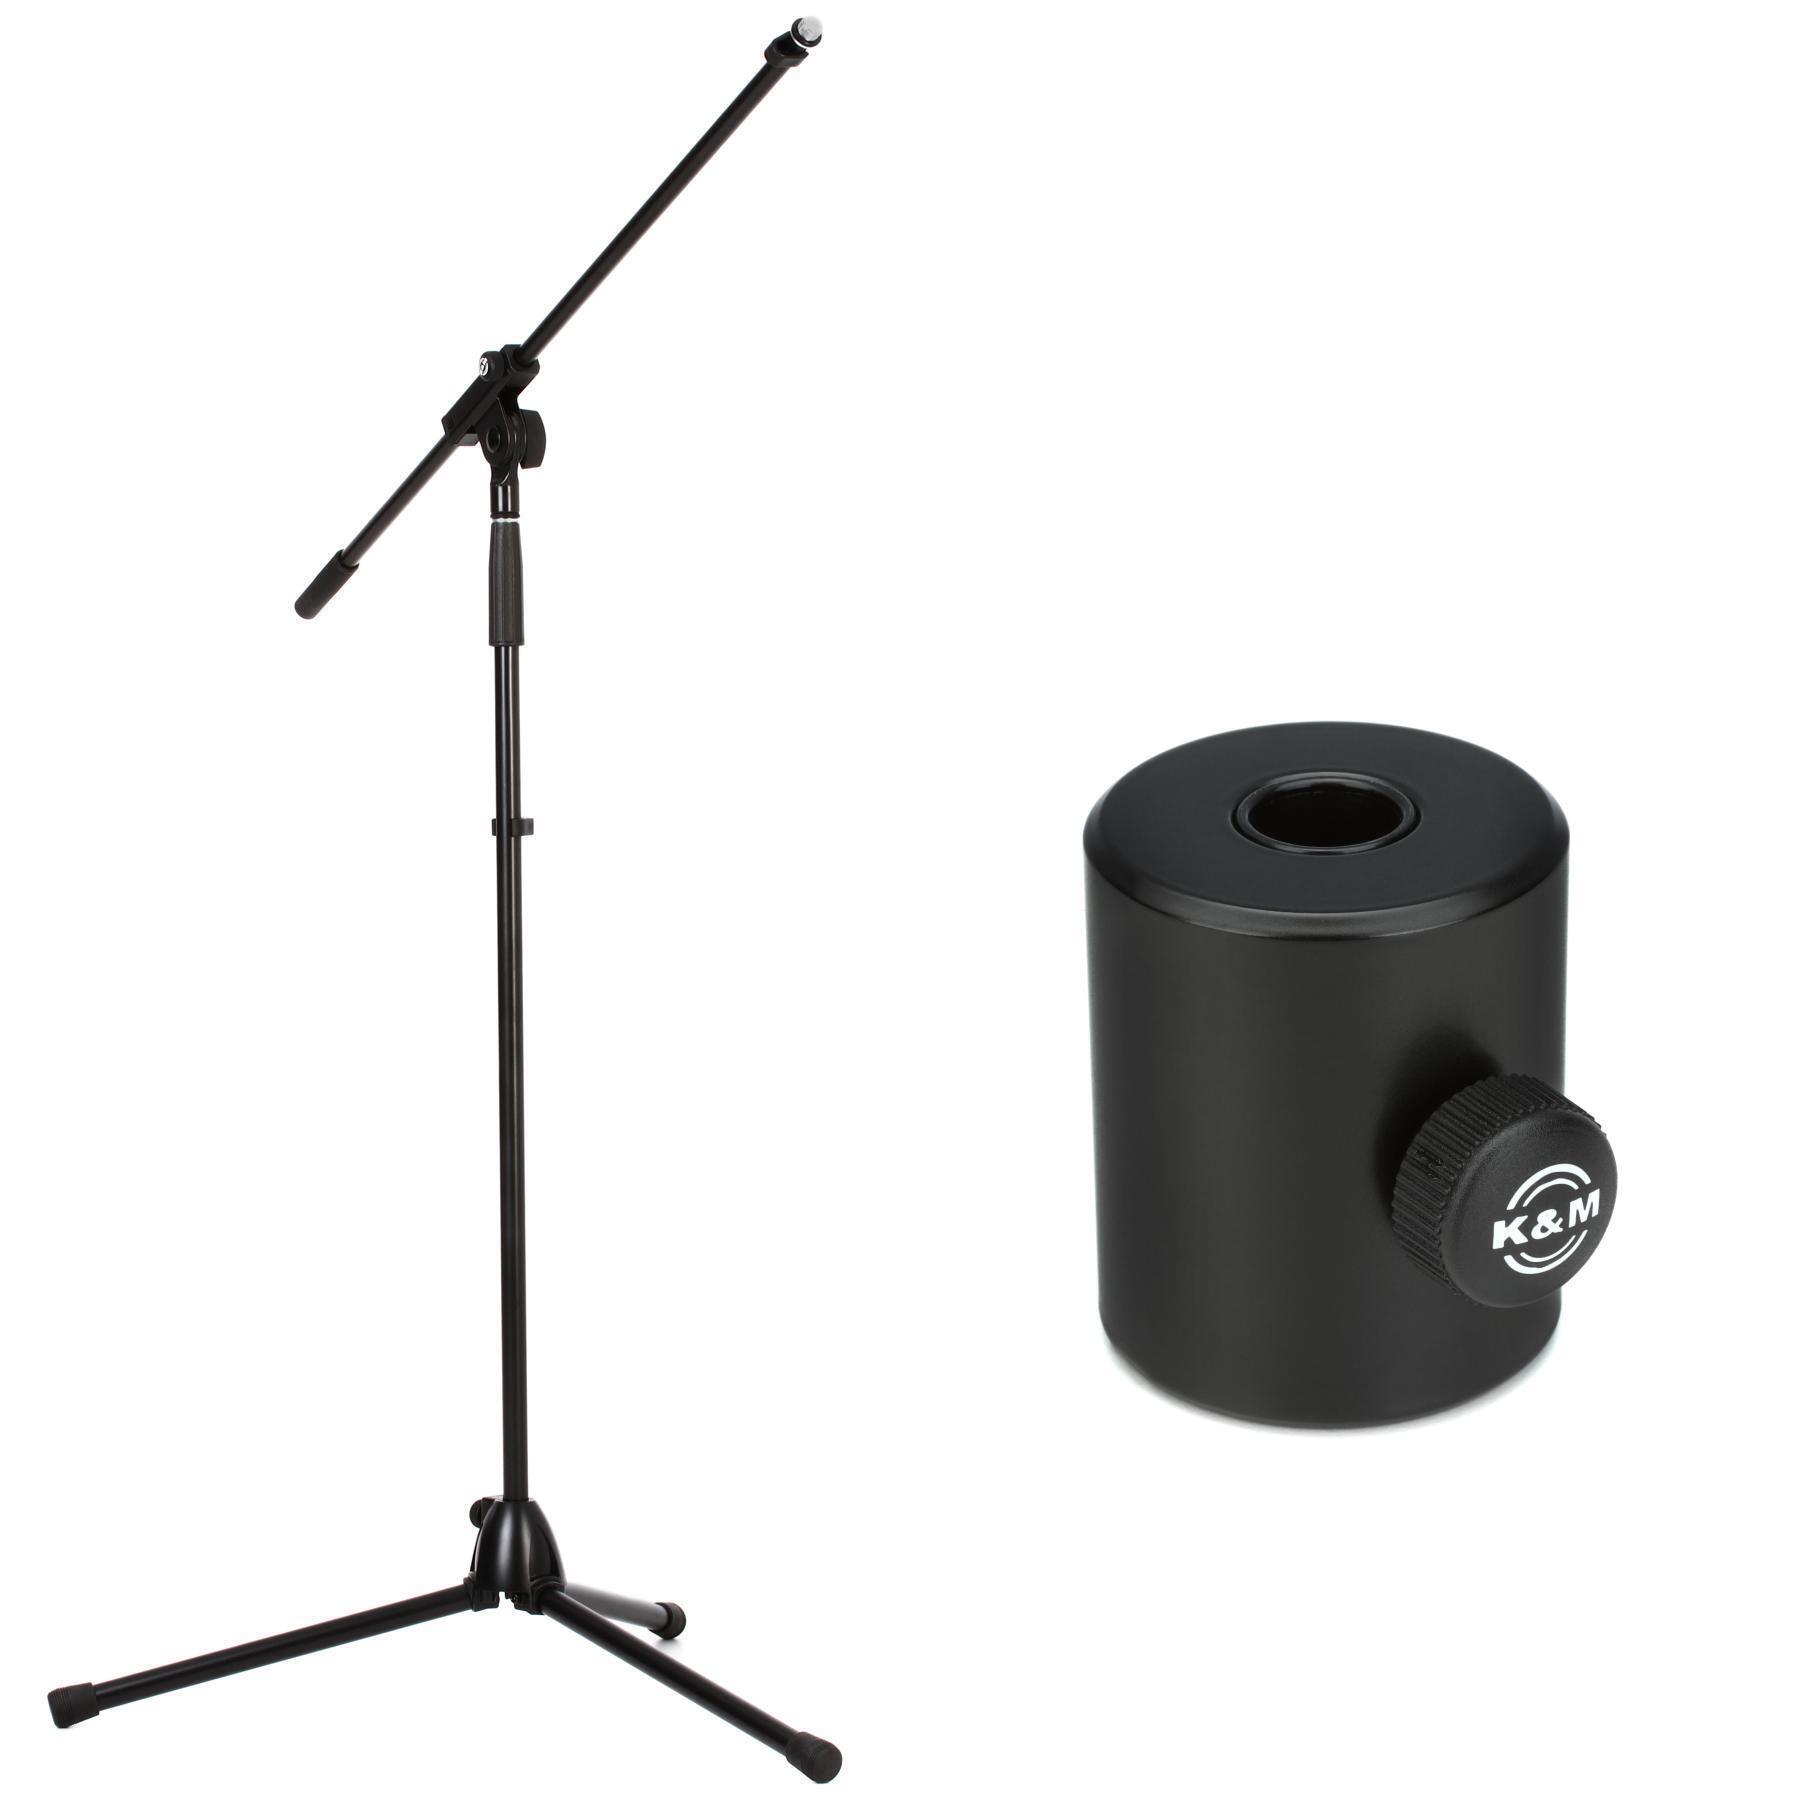 K&M 21070 Microphone Stand and Counterweight | Sweetwater